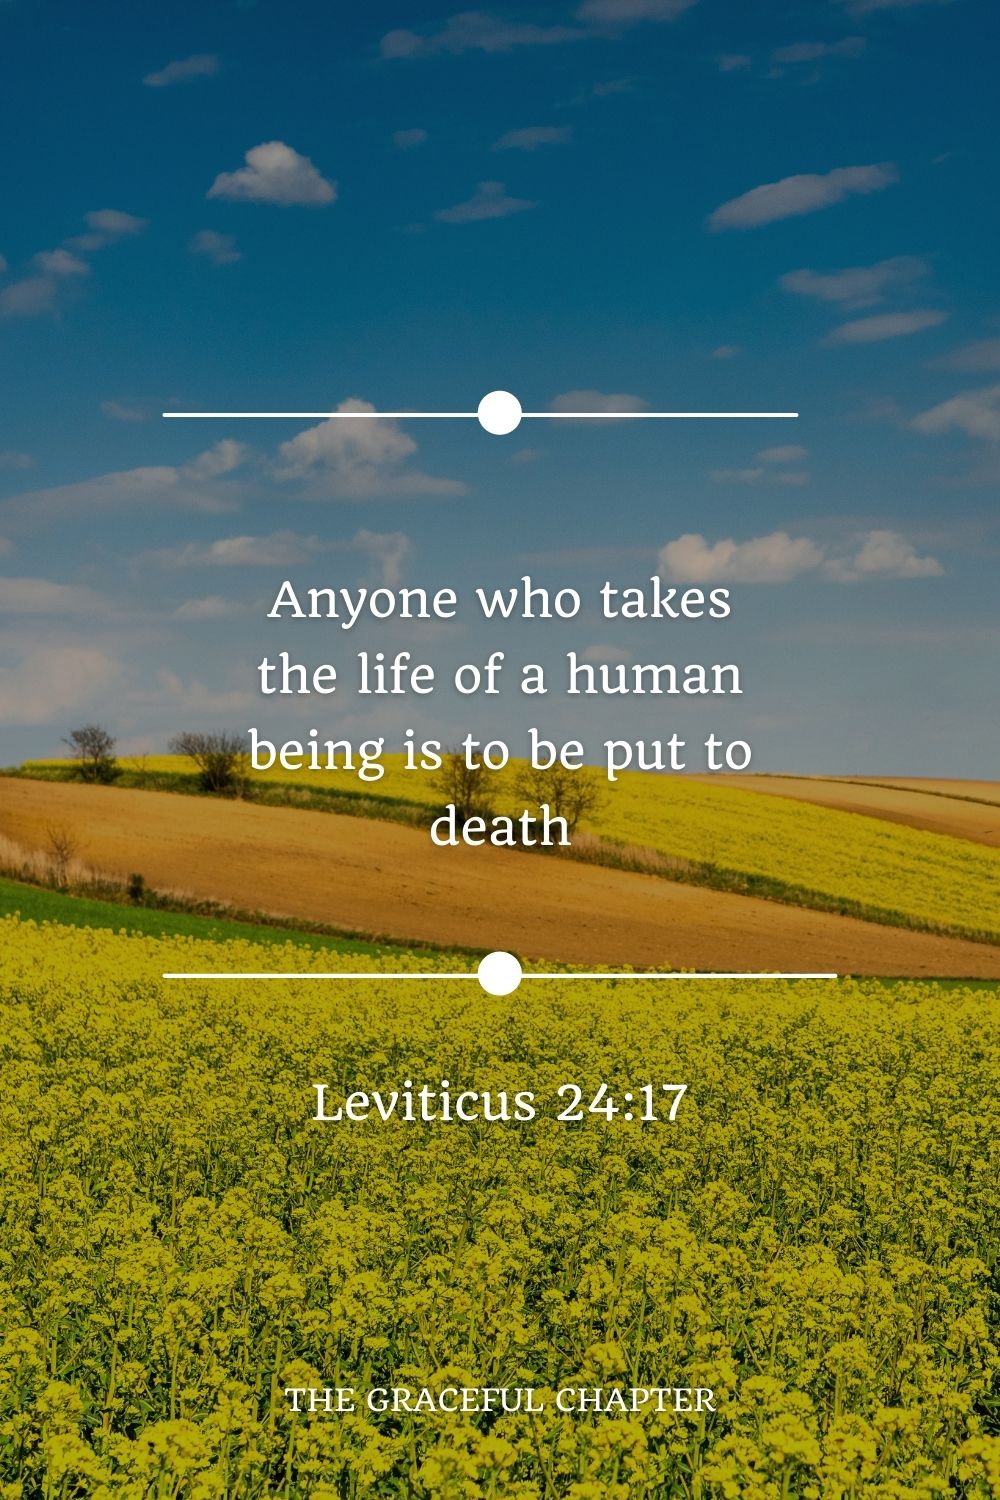 Anyone who takes the life of a human being is to be put to death. Leviticus 24:17